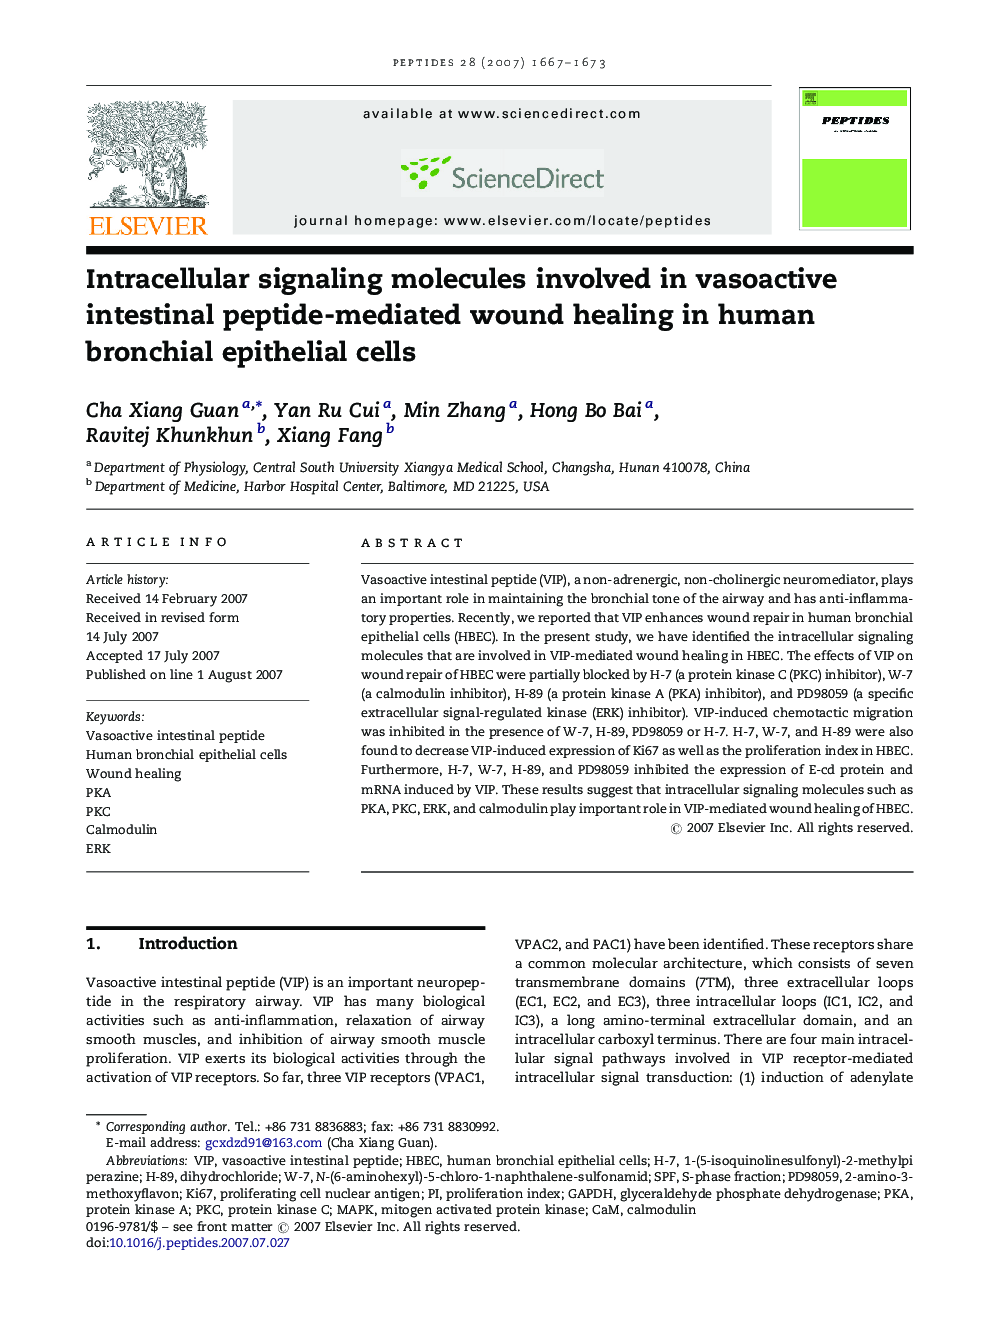 Intracellular signaling molecules involved in vasoactive intestinal peptide-mediated wound healing in human bronchial epithelial cells